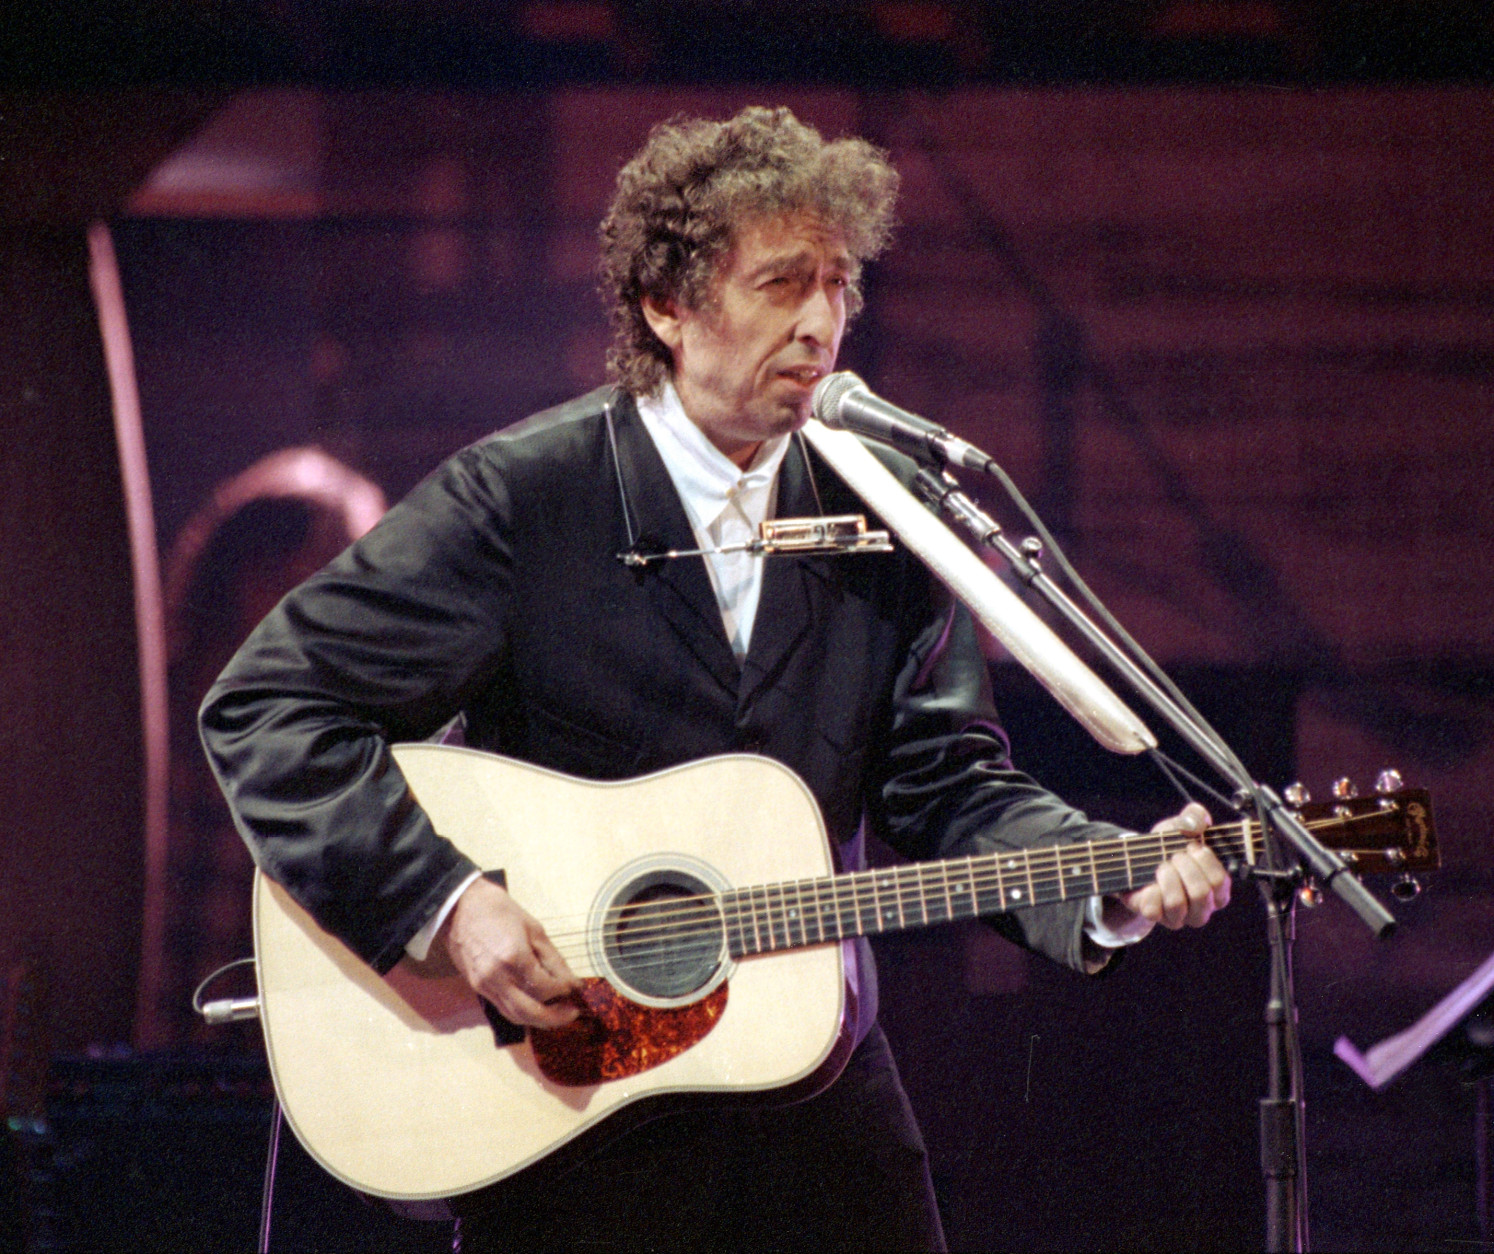 Bob Dylan sings during his anniversary concert at New York's Madison Square Garden, Friday night, Oct. 17, 1992.  Joined by contemporary artists, Dylan celebrates the 30th anniversary of the release of his first Columbia album.  (AP Photo/Ron Frehm)